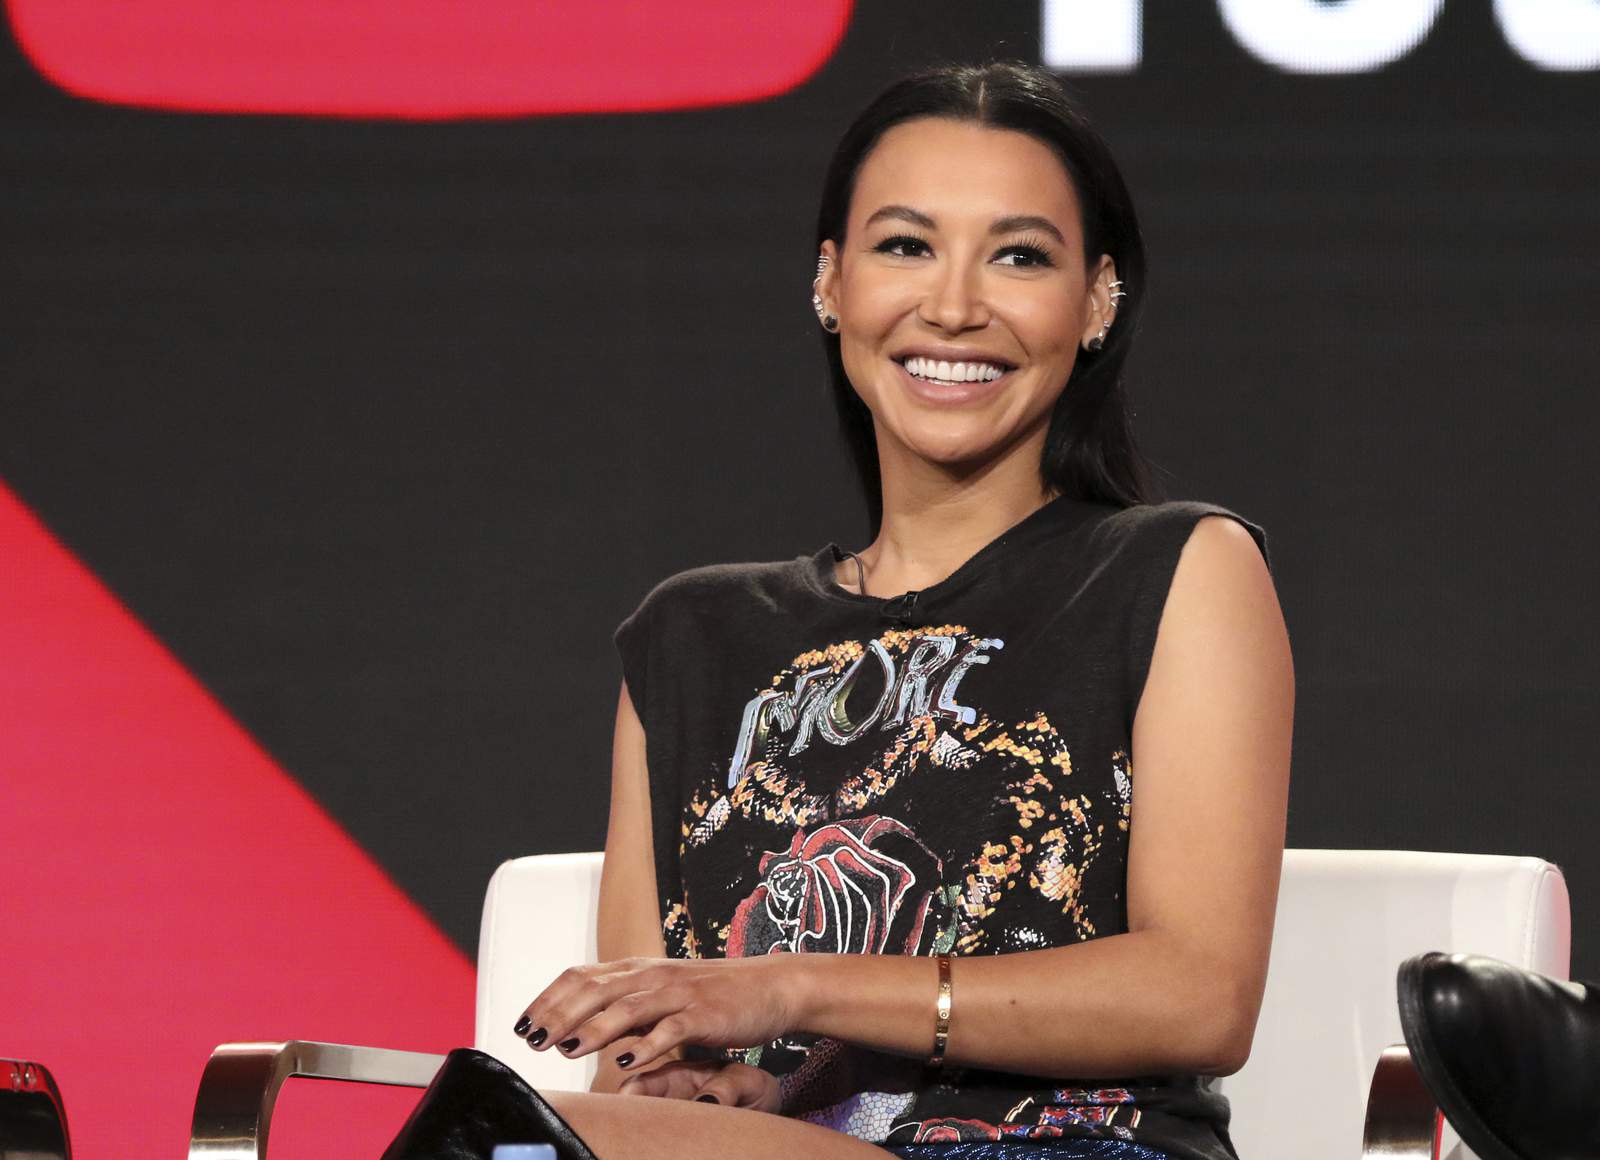 Glee actress Naya Rivera mustered enough energy to rescue her son but not enough to save herself, authorities say